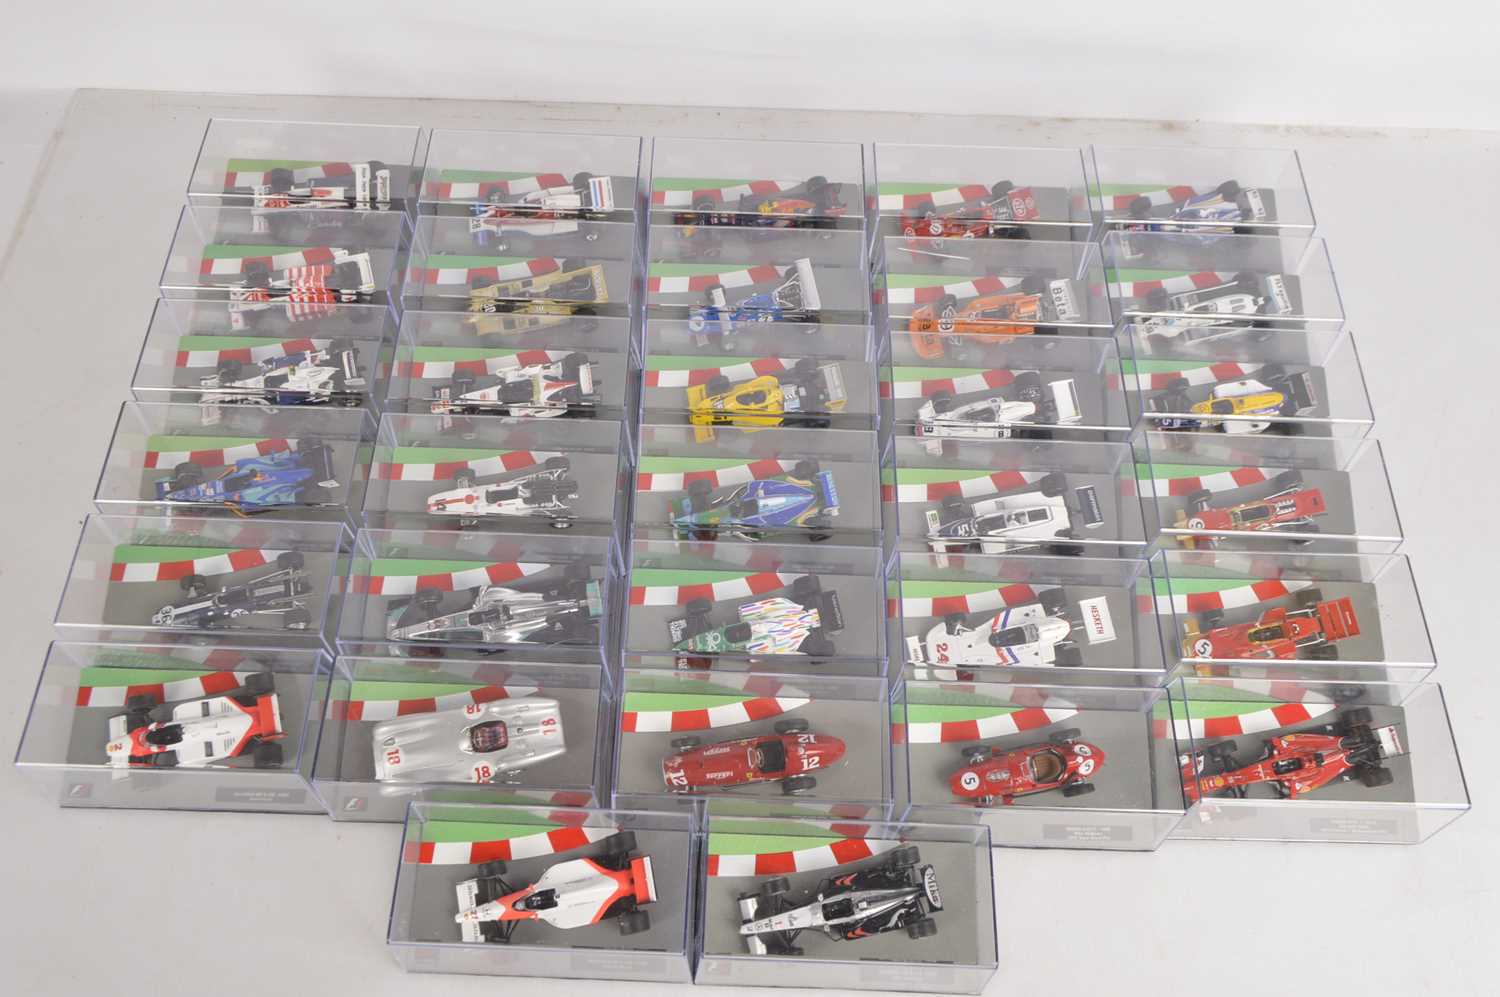 F1 Car Collection 1:43 Scale Issued by Panini (107), - Image 3 of 4